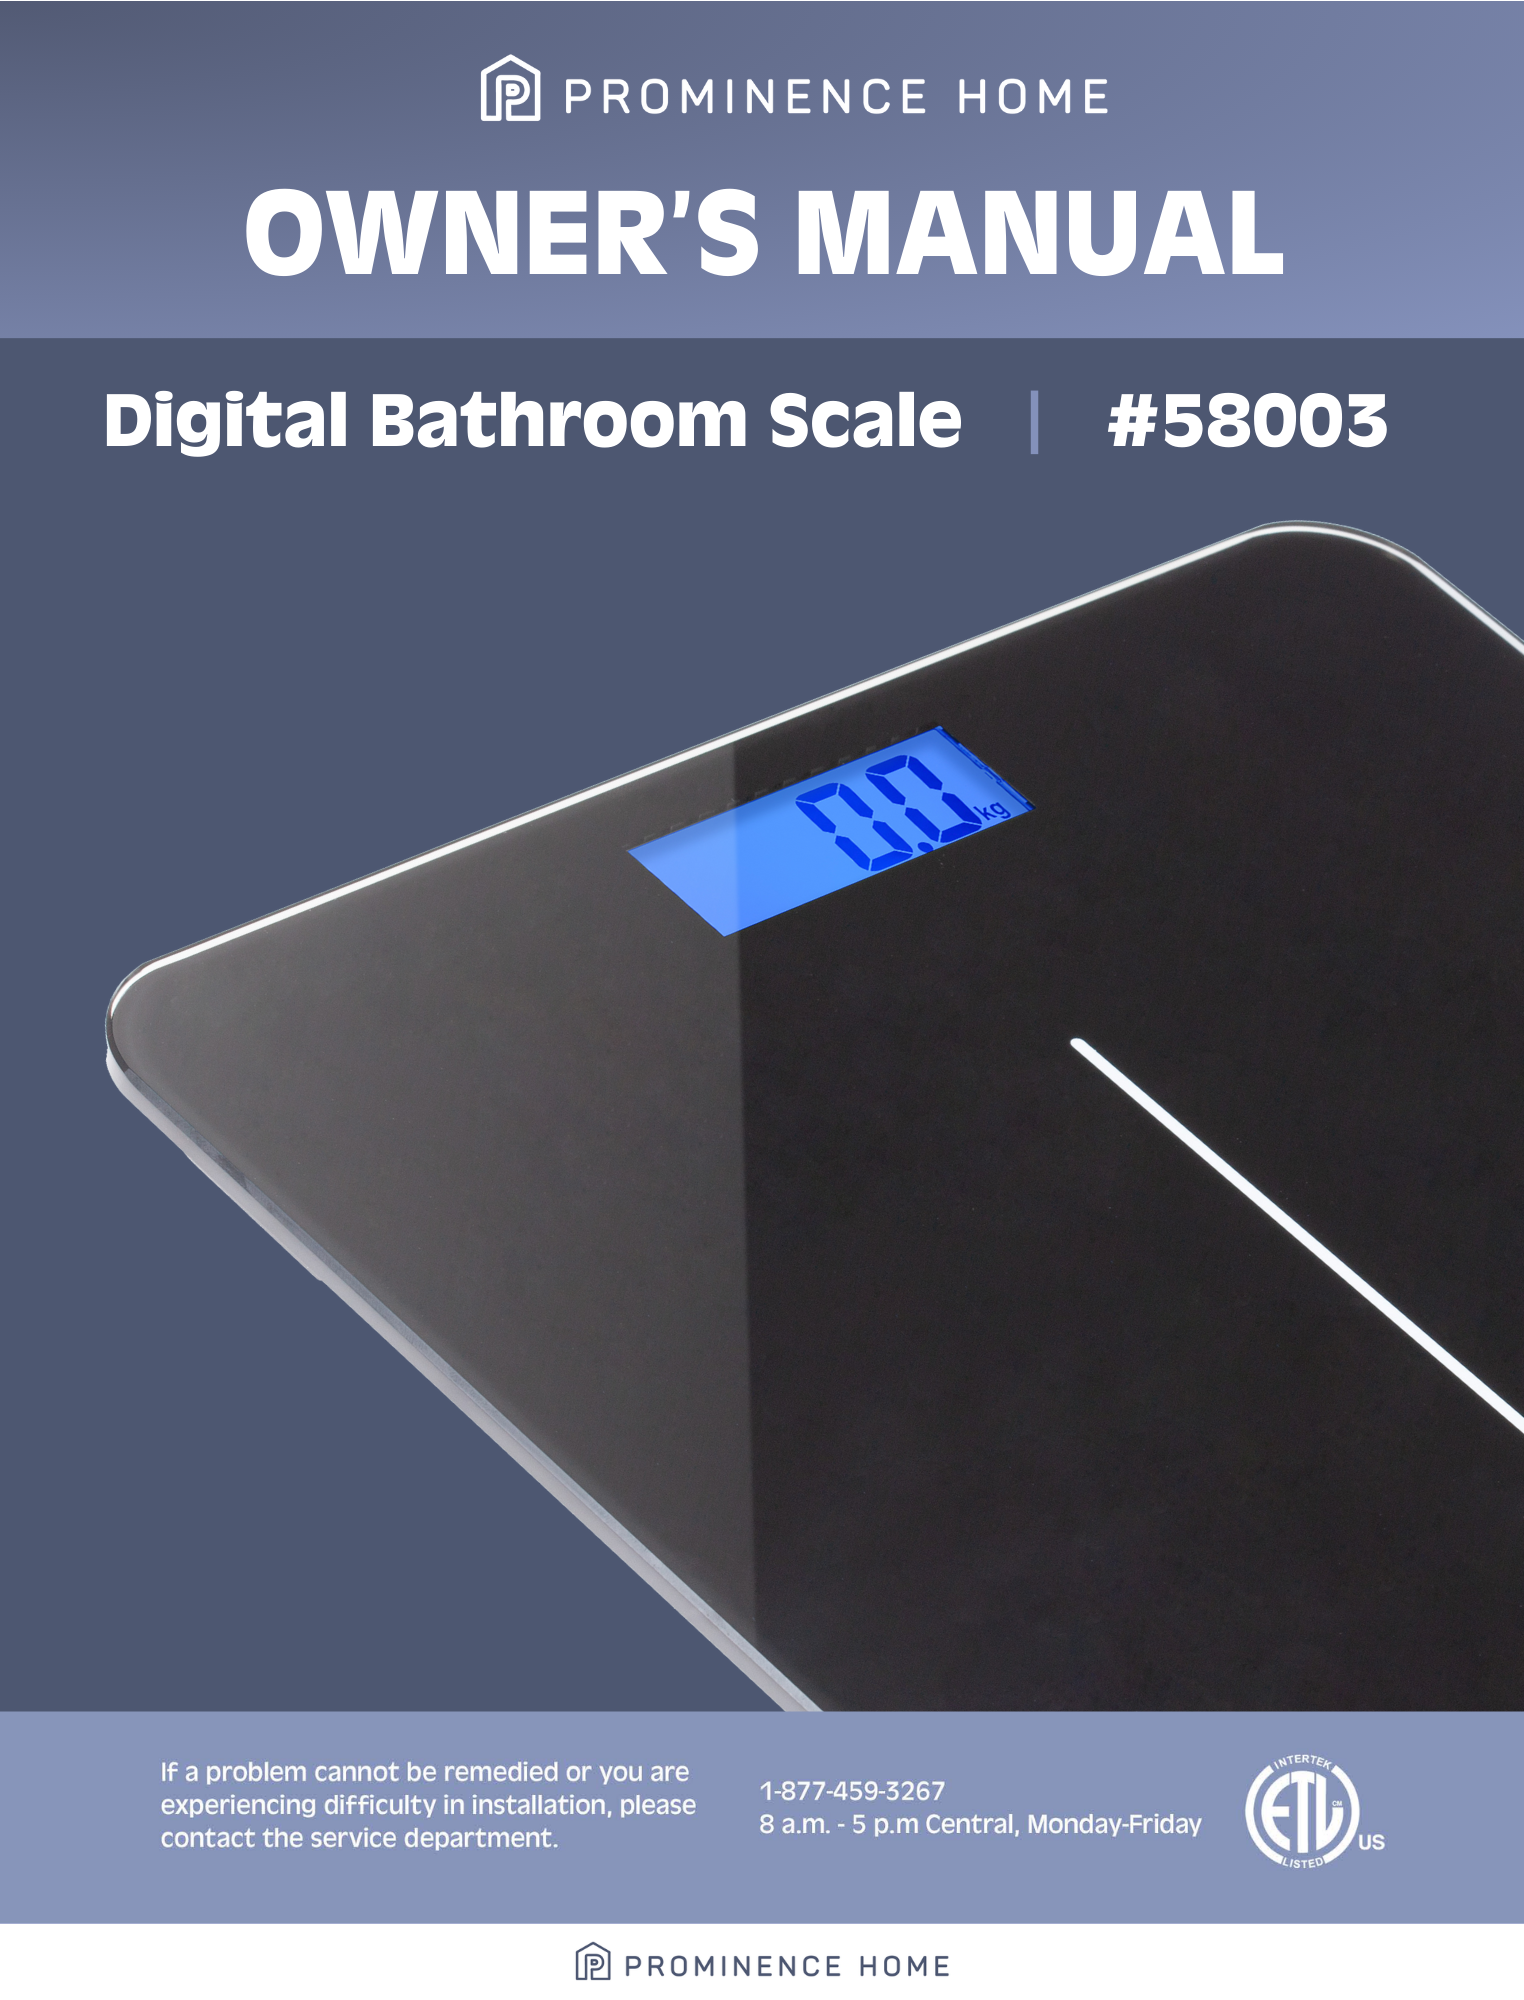 https://cld.accentuate.io/8133255626991/1697145825705/58003-Digital-Bathroom-Scale.png?v=1697145825705&options=